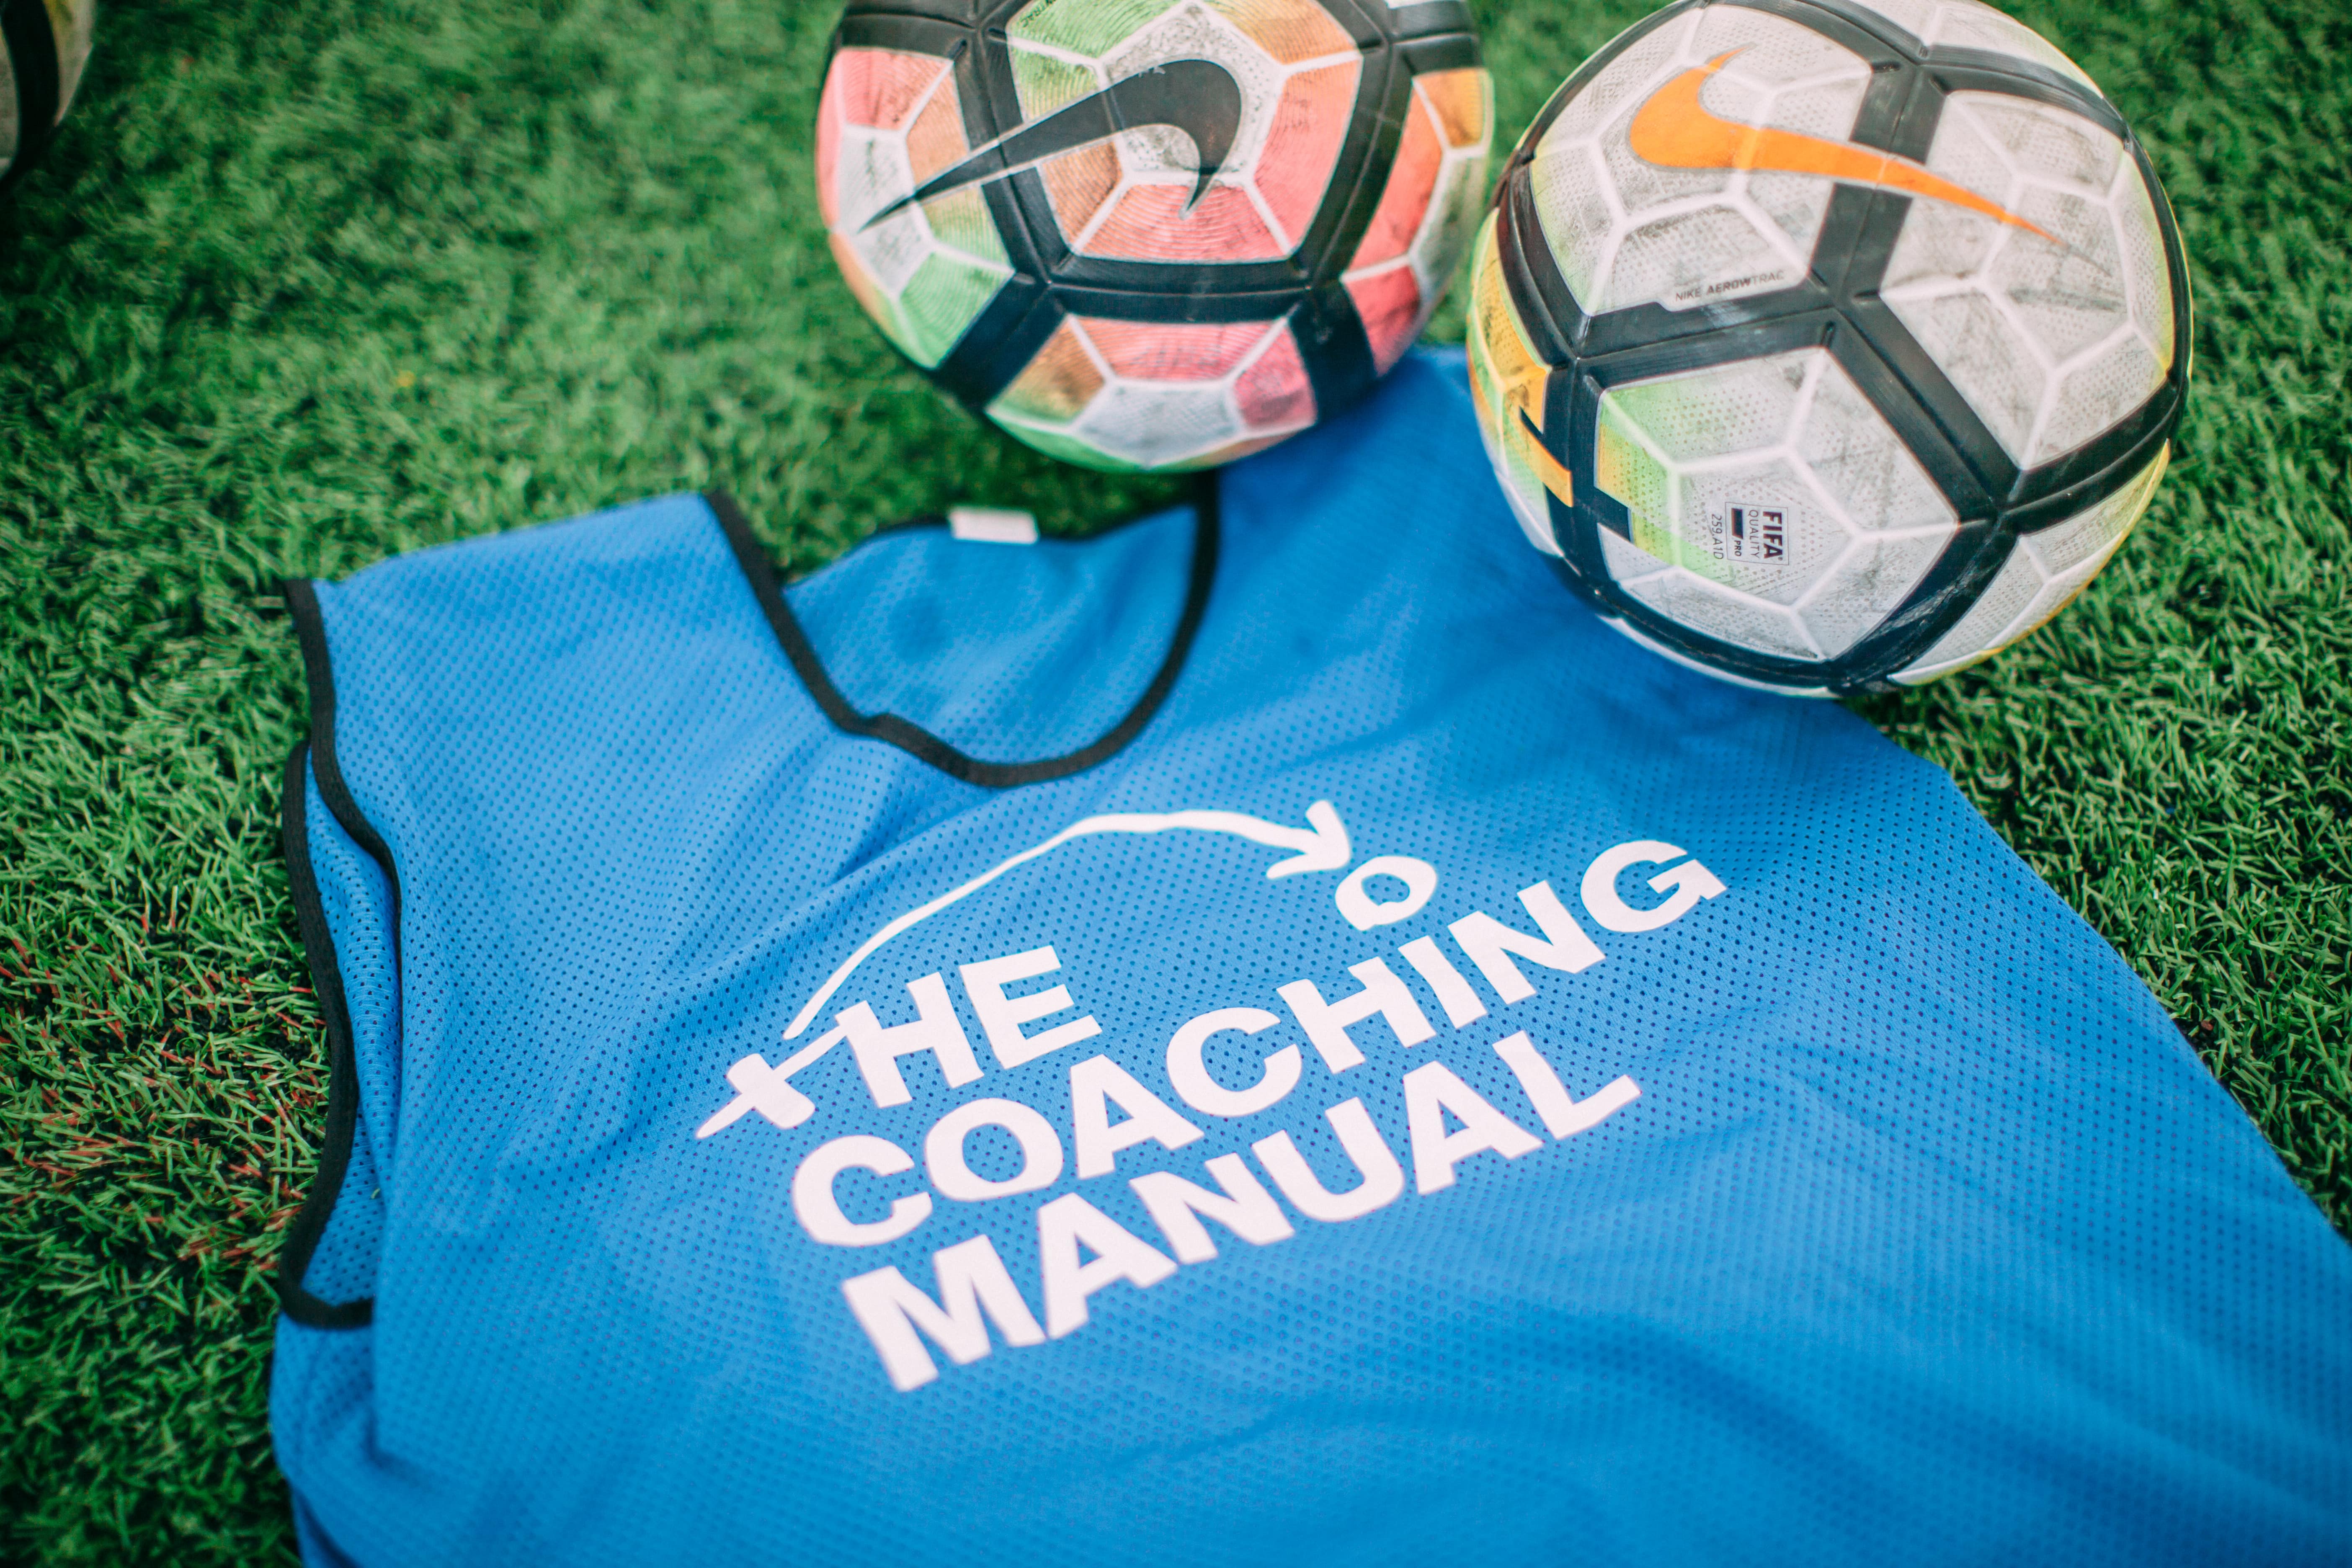 4 Examples of How The Coaching Manual Can Help Your Soccer Club